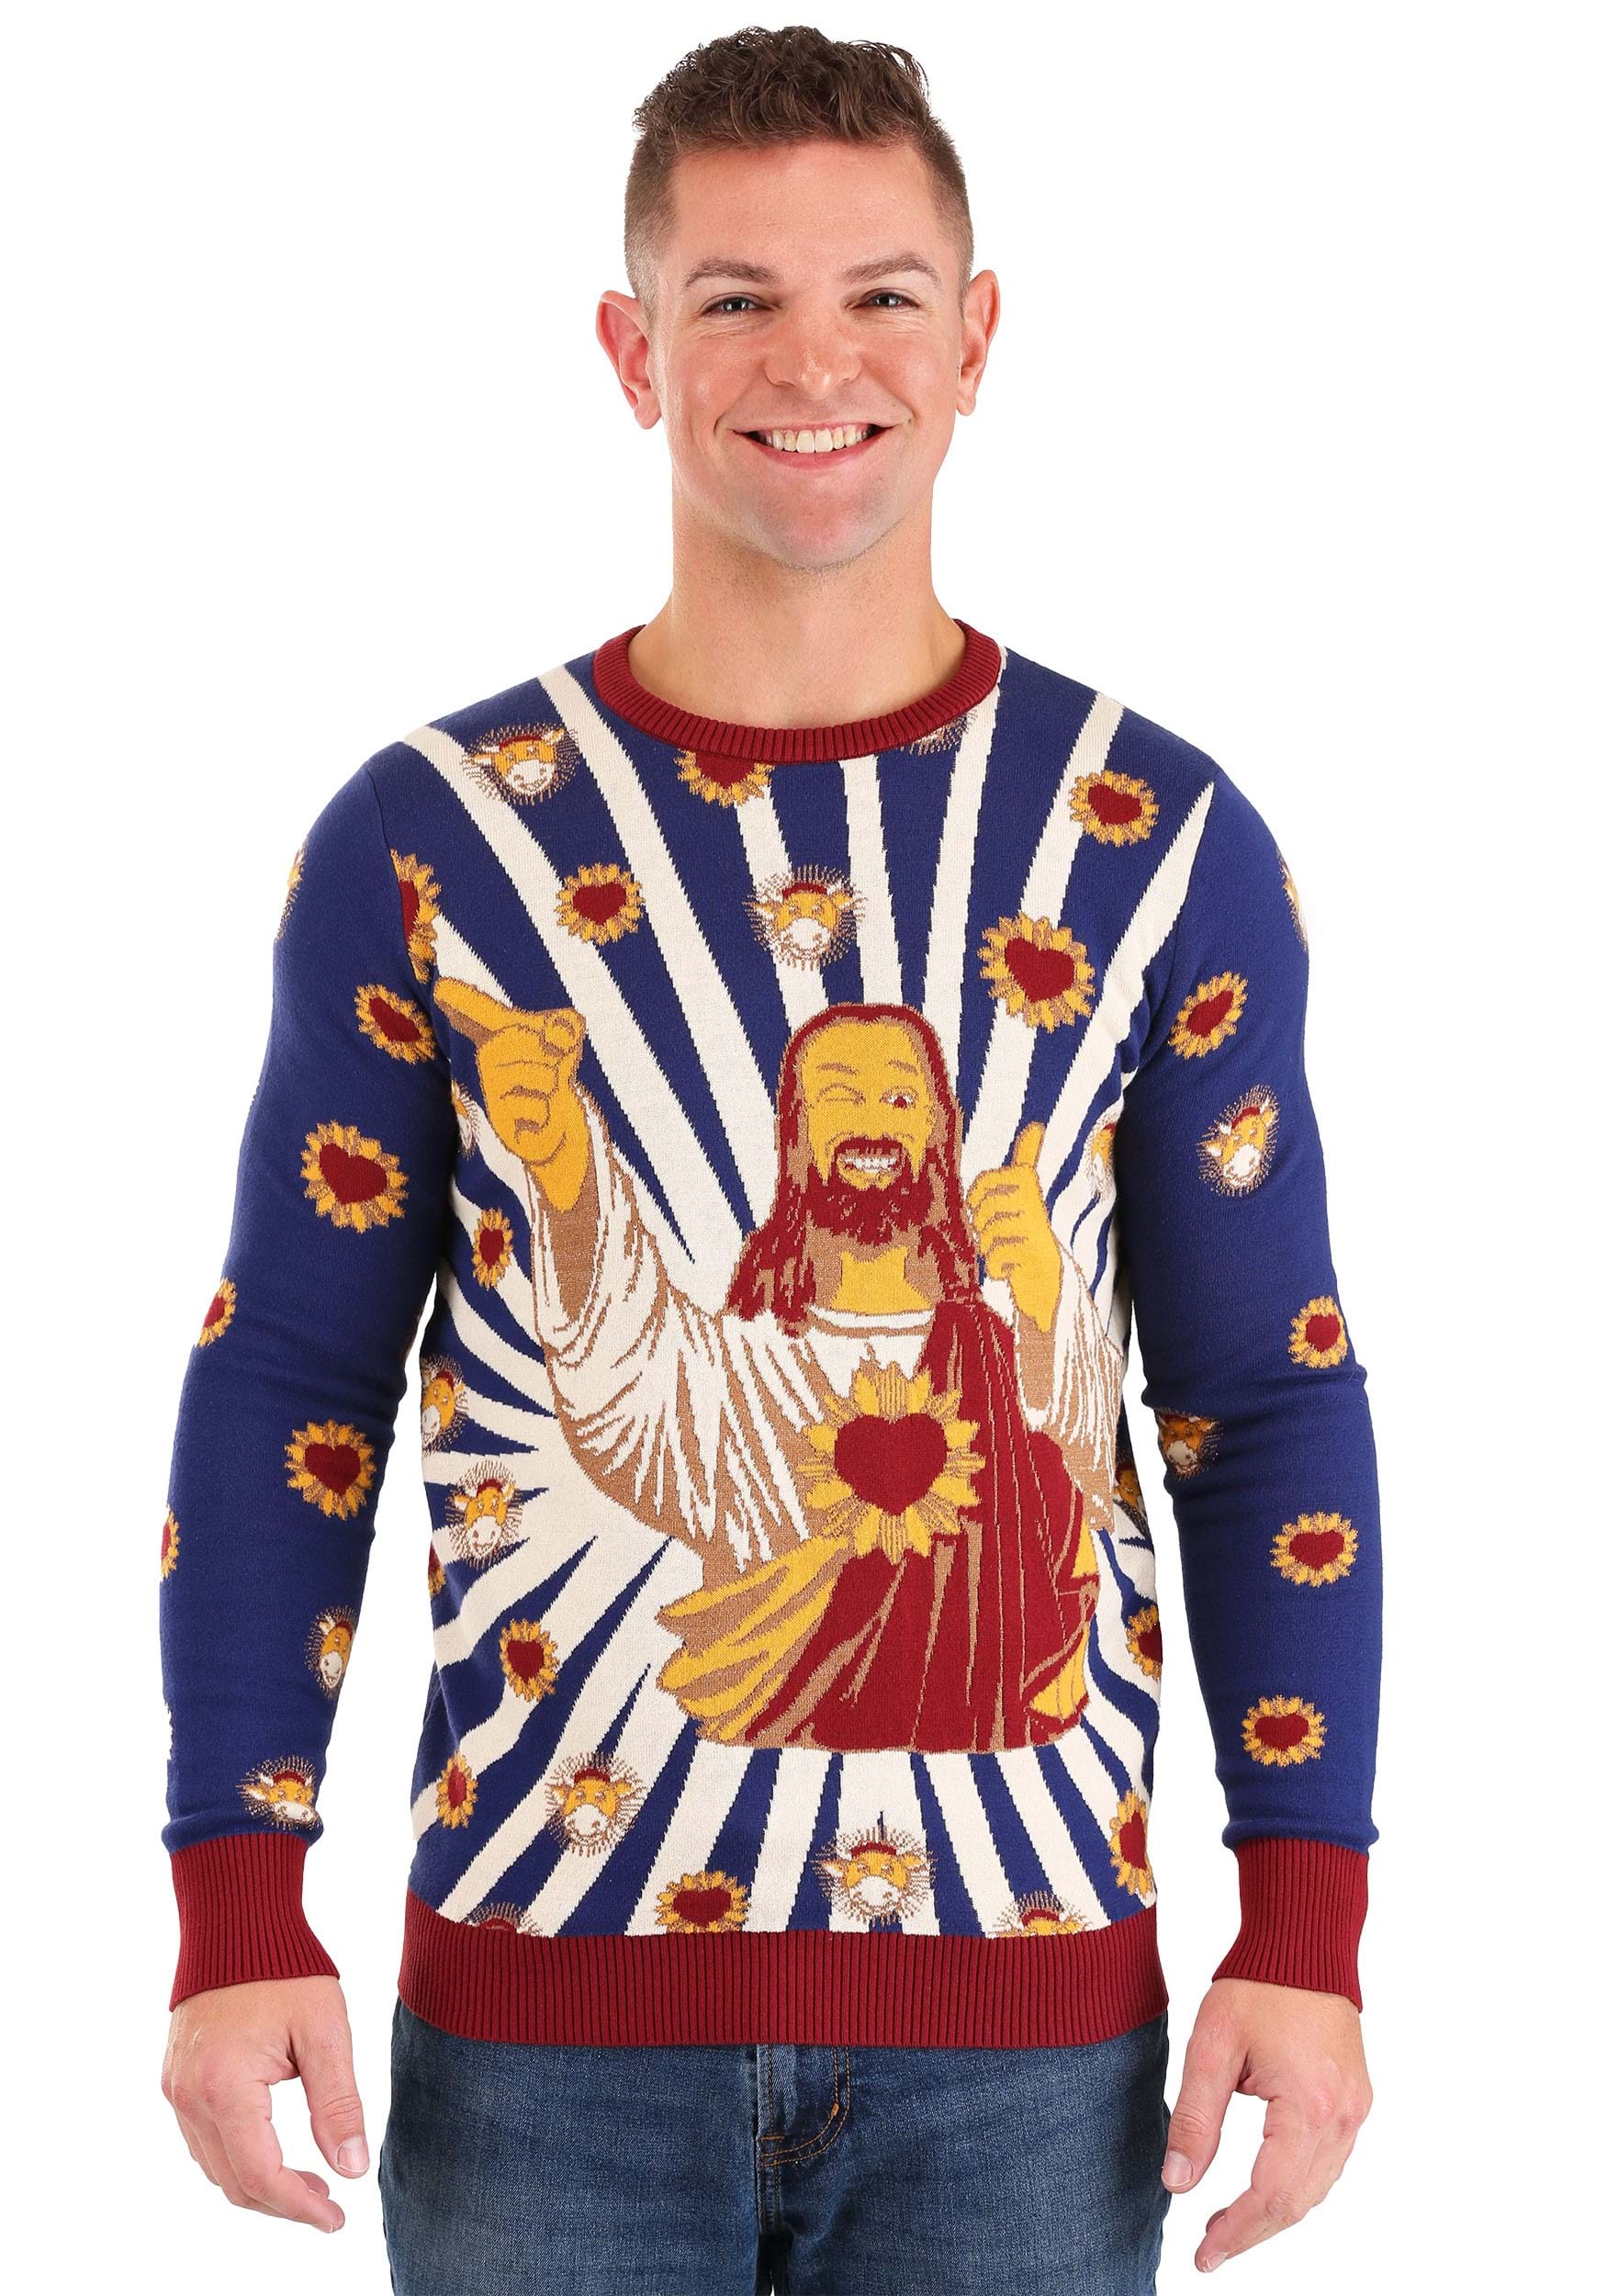 Photos - Fancy Dress A&D FUN Wear Jay and Silent Bob Buddy Christ Jesus Ugly Christmas Sweater Red& 